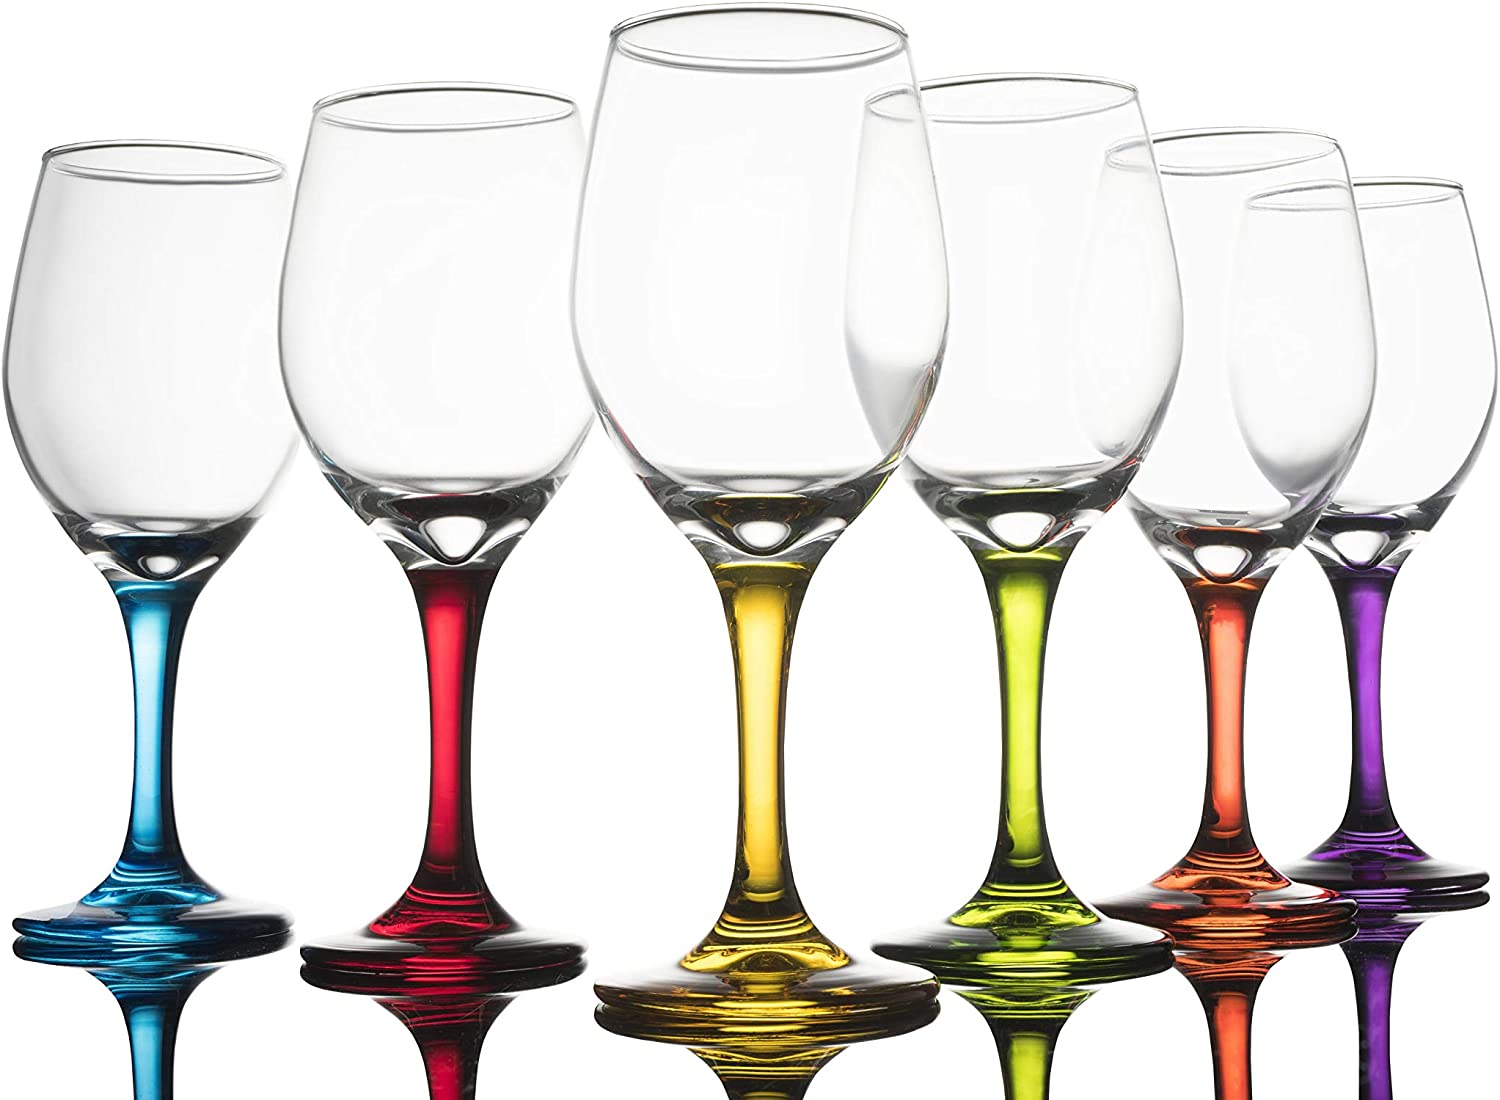 Saludi Colored Wine Glasses, 16.5oz (Set of 6) Stemmed Multi-Color Glass -  Great for all Wine Types …See more Saludi Colored Wine Glasses, 16.5oz (Set